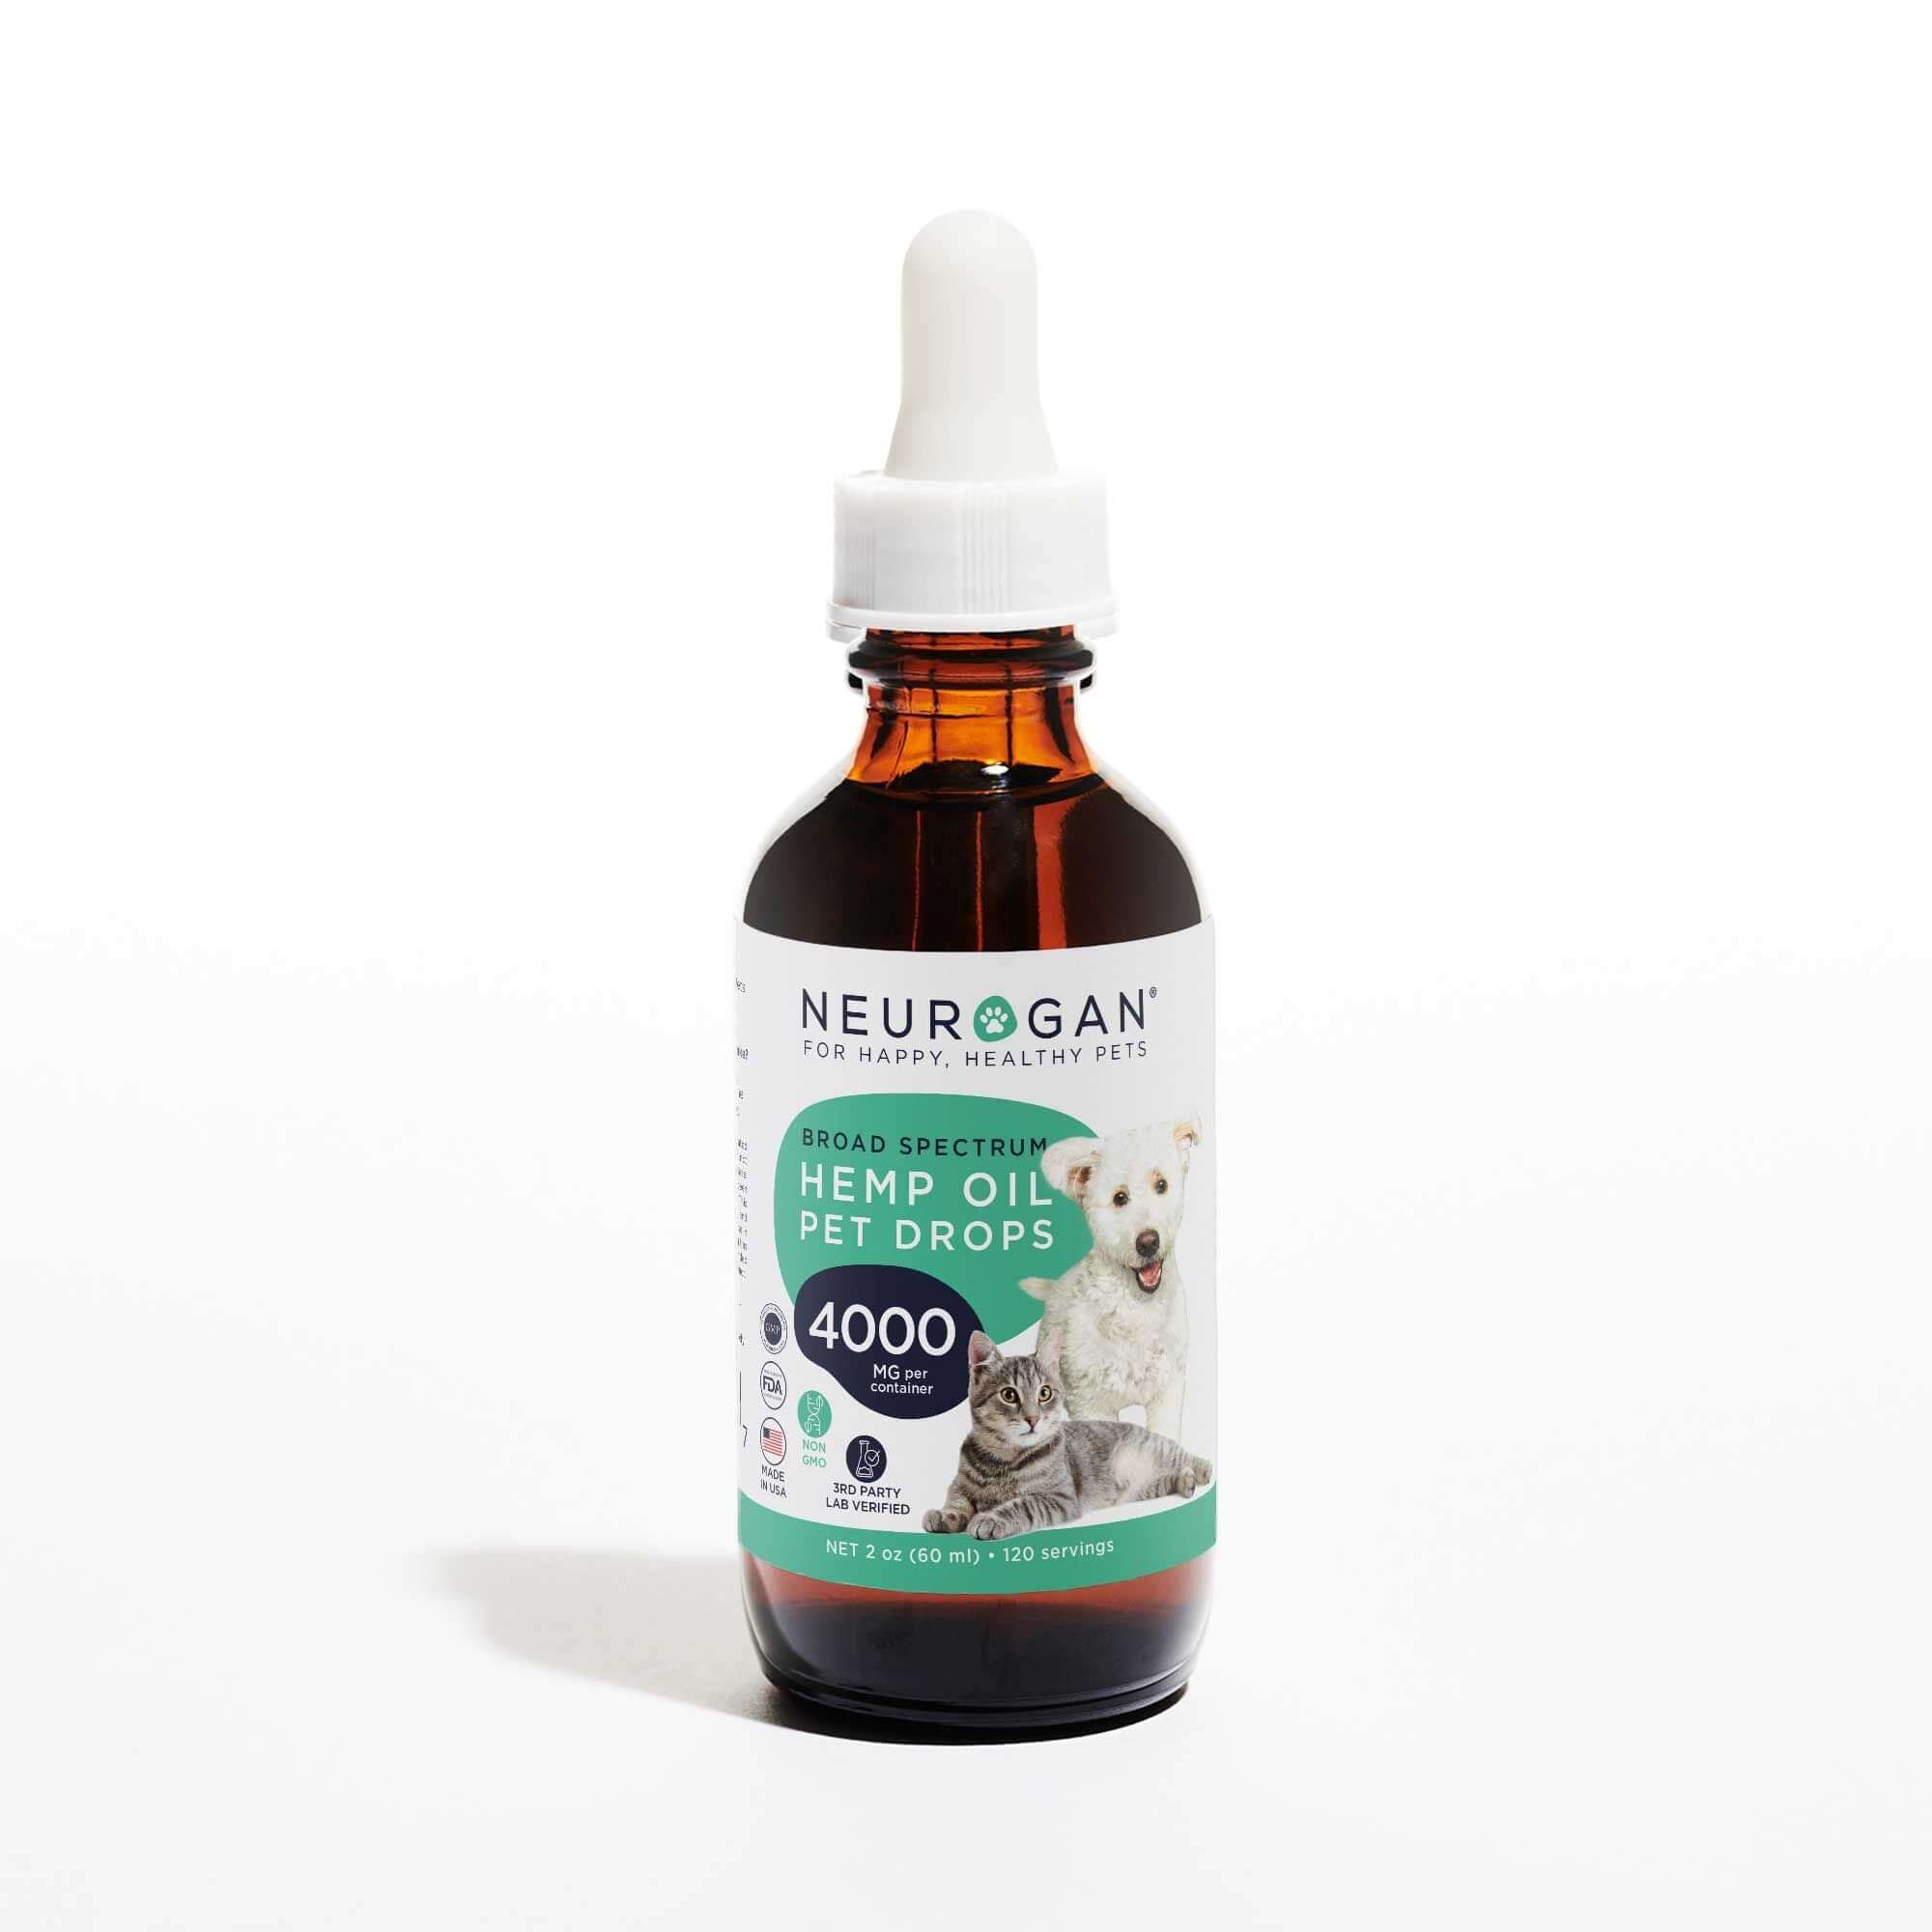 A bottle of CBD Pet oil 4000mg in a 2oz amber bottle, white dropper top and a label featuring a dog and cat